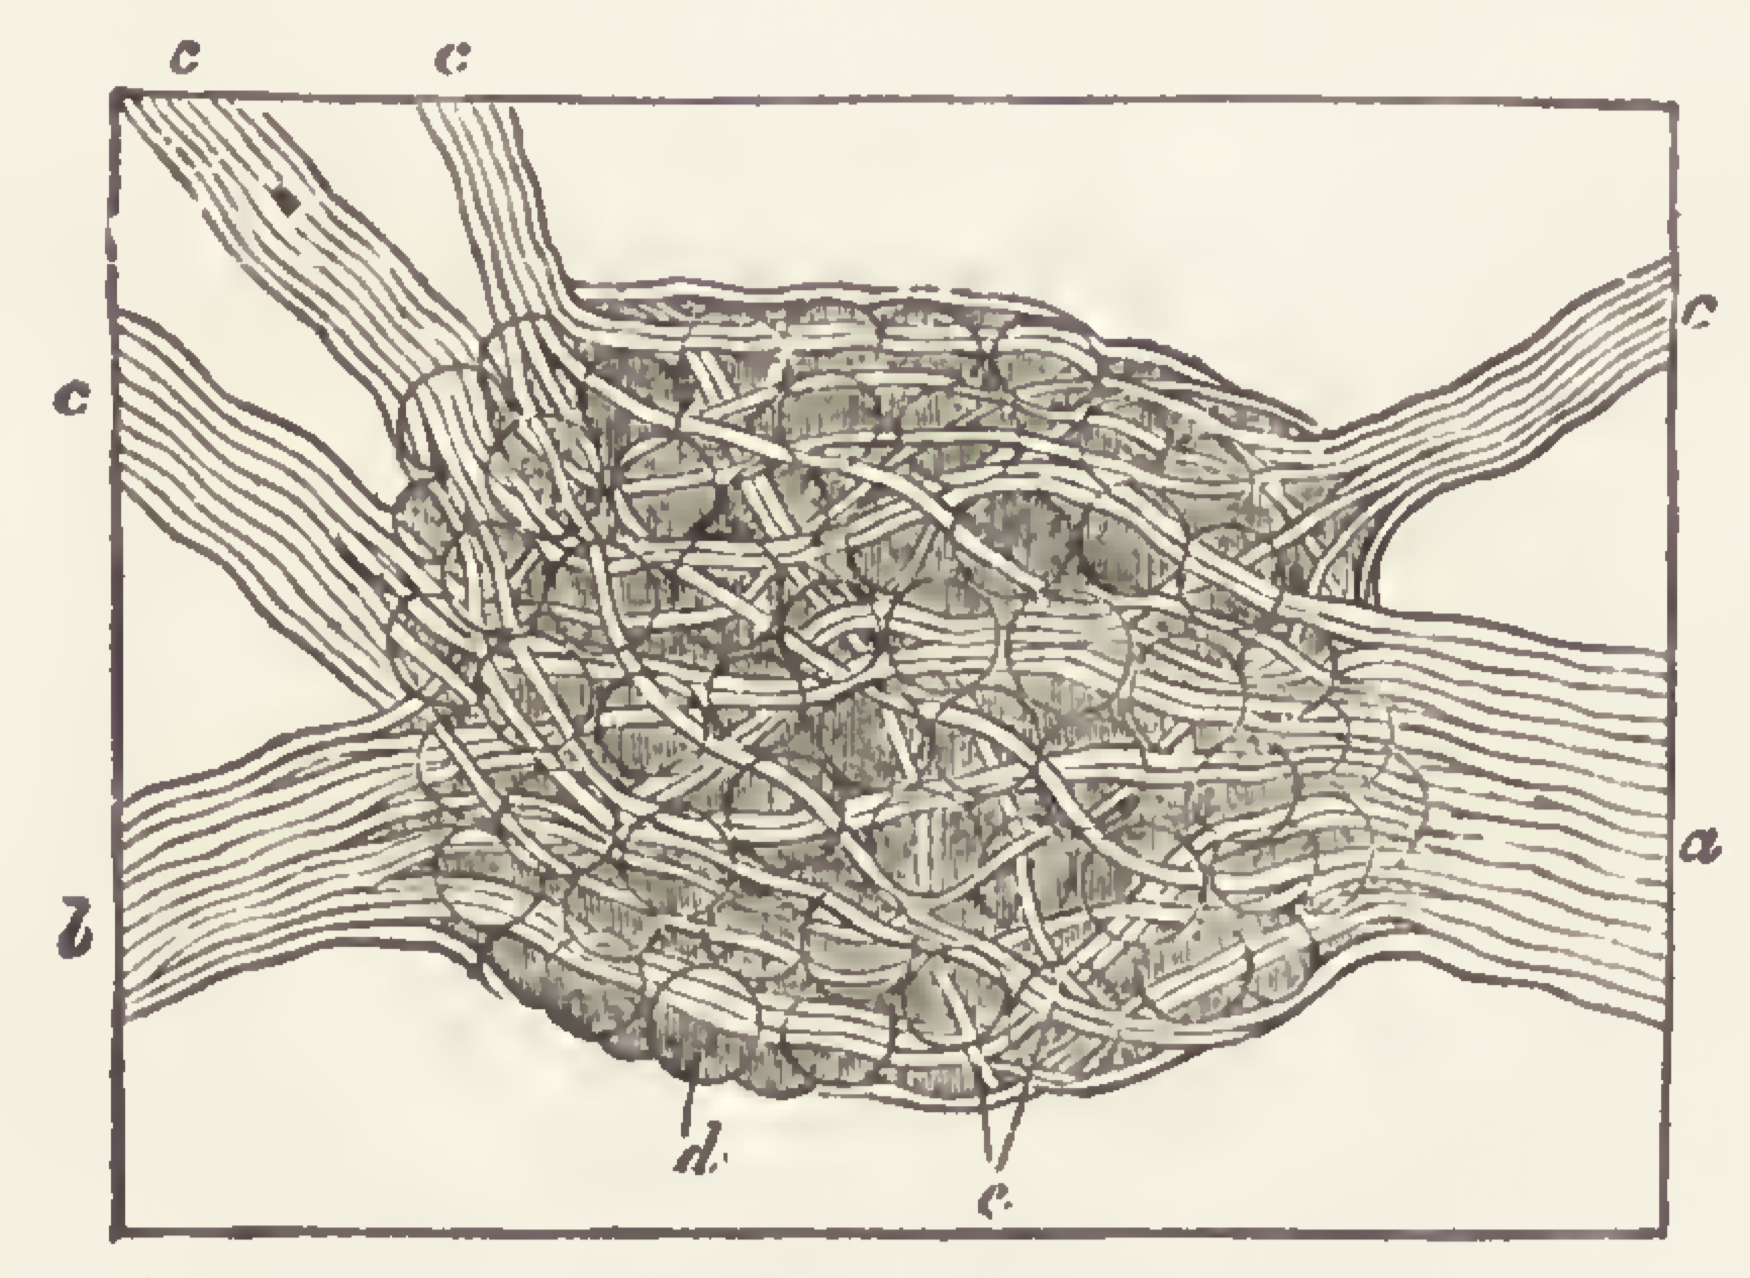 Black-and-white illustration of cross-section of a neuron. Its central body contains bubbles or balls. White lines twist among the balls and spread outward into bundles of filaments leading to the edge of the image. This and many other illustrations are from a 19th Century book titled “The principles of light and color”.